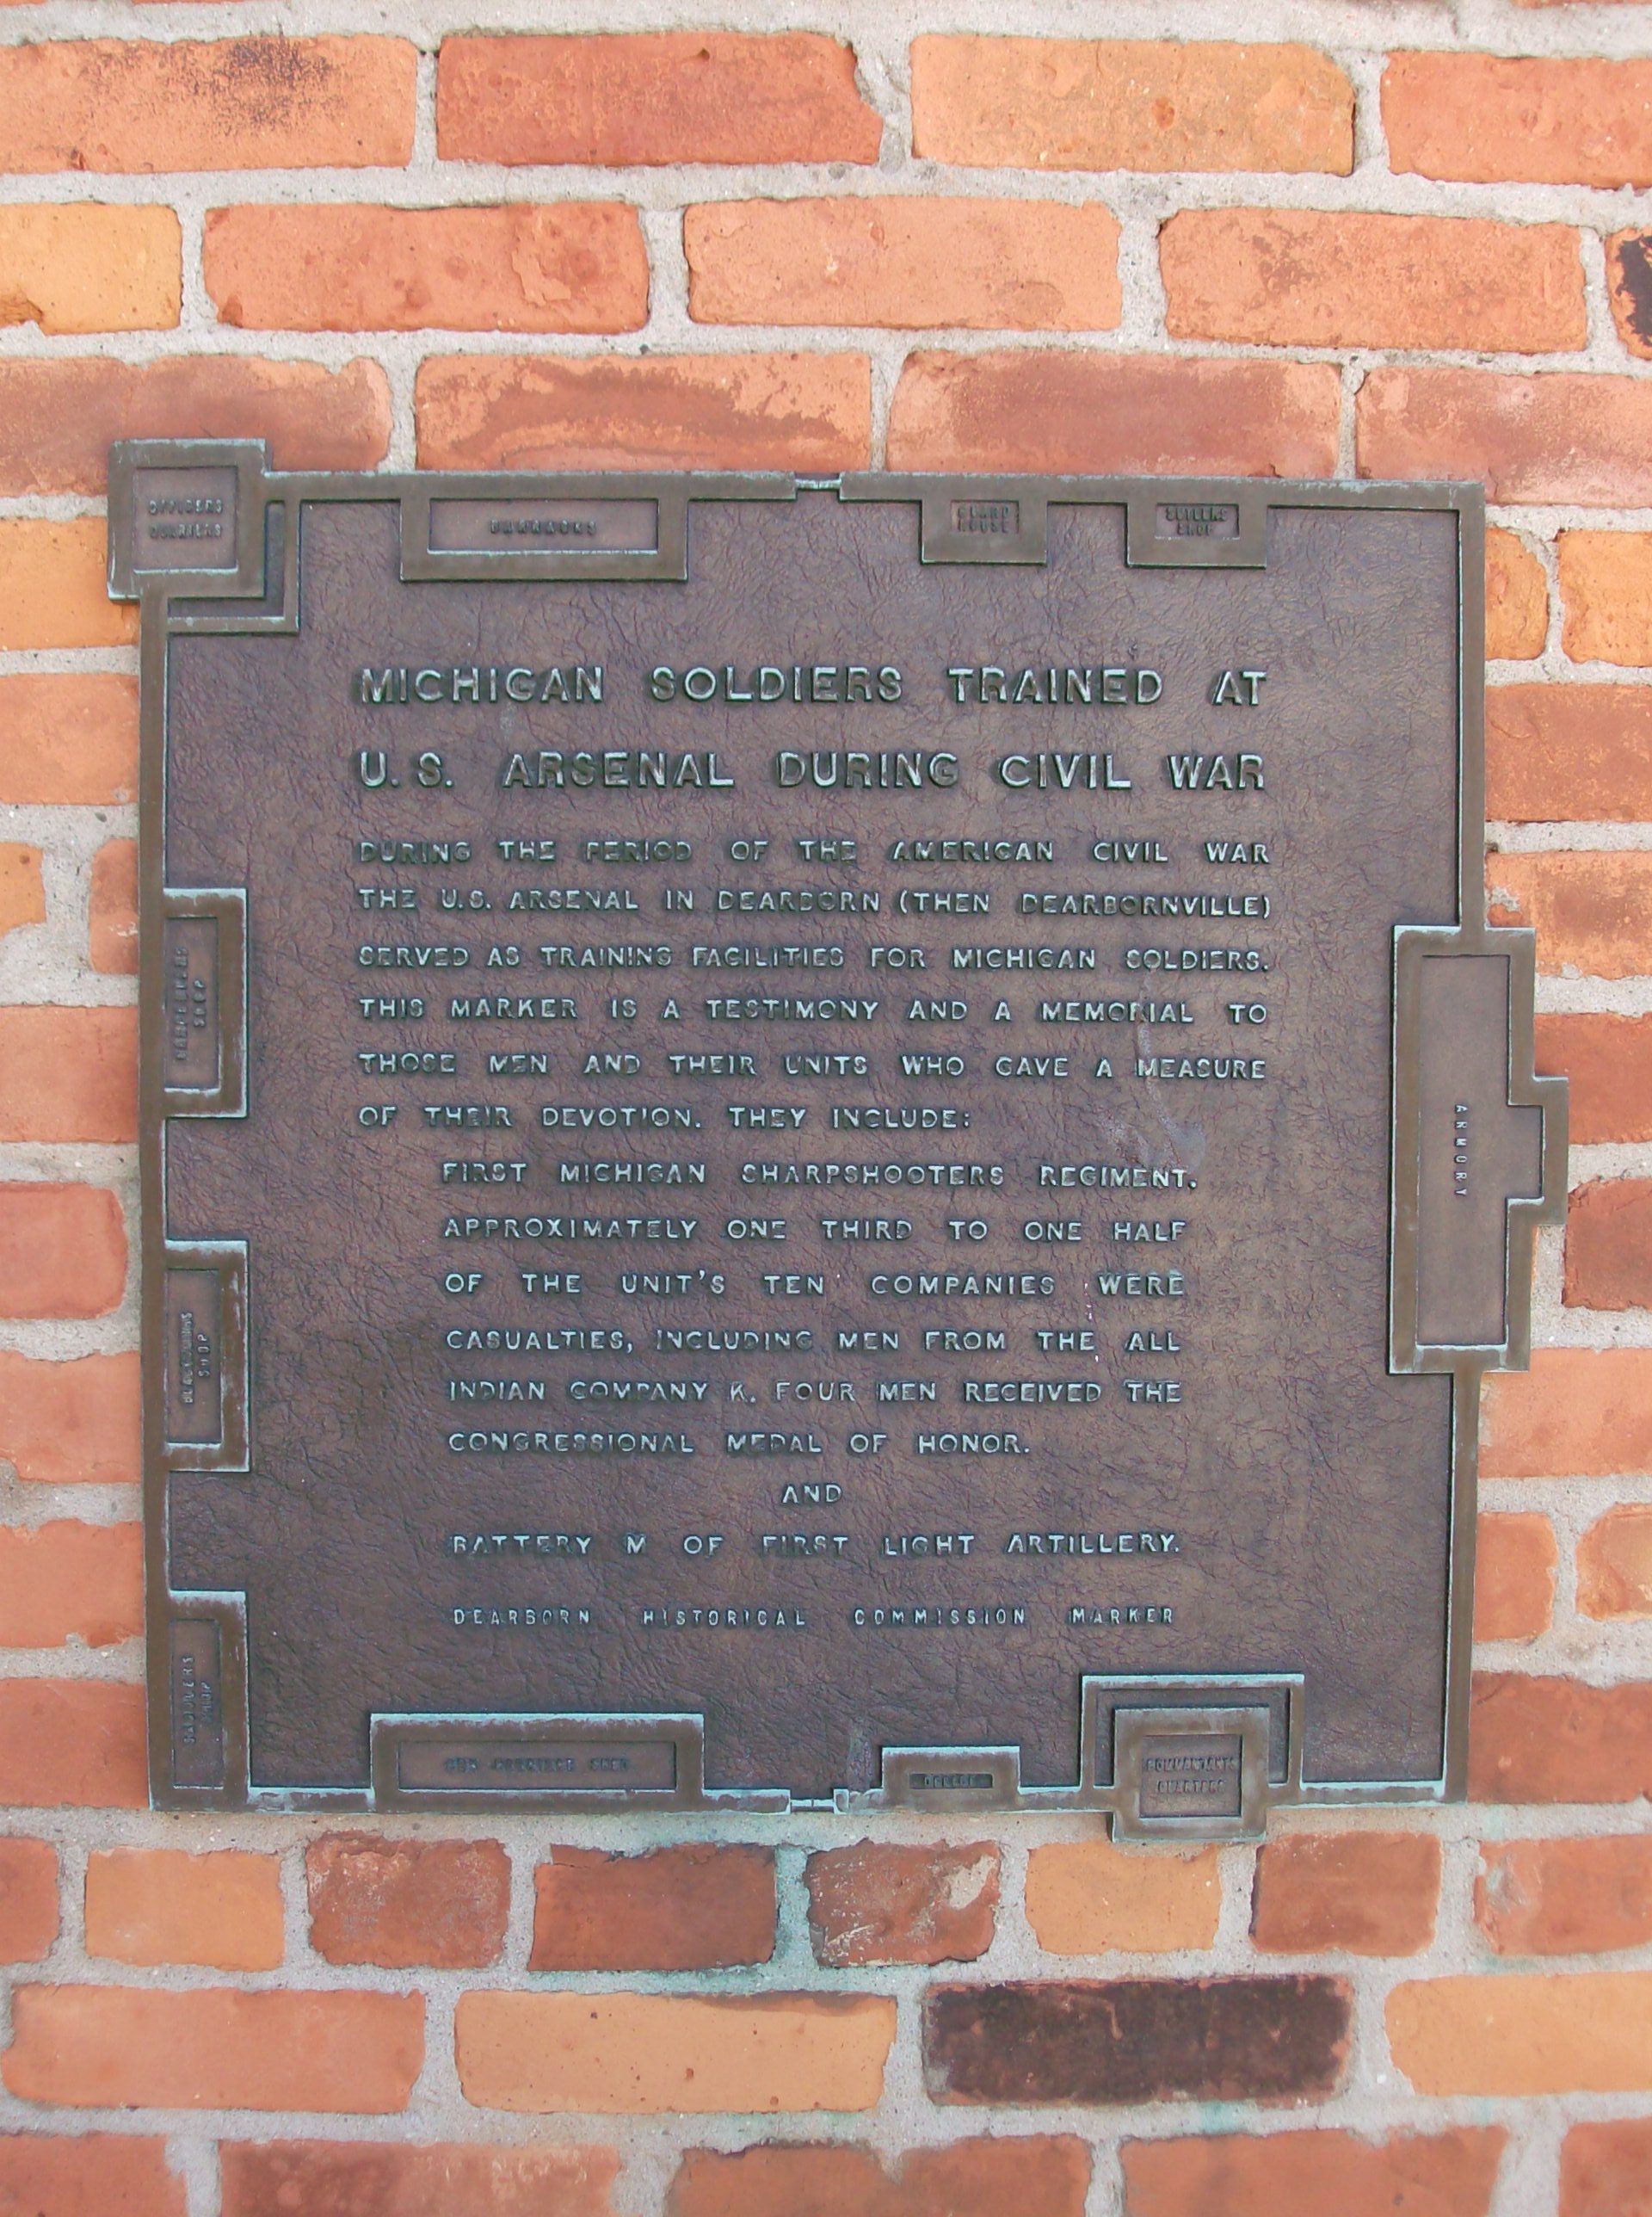 Michigan Soldiers Trained at U.S. Arsenal During Civil War Marker